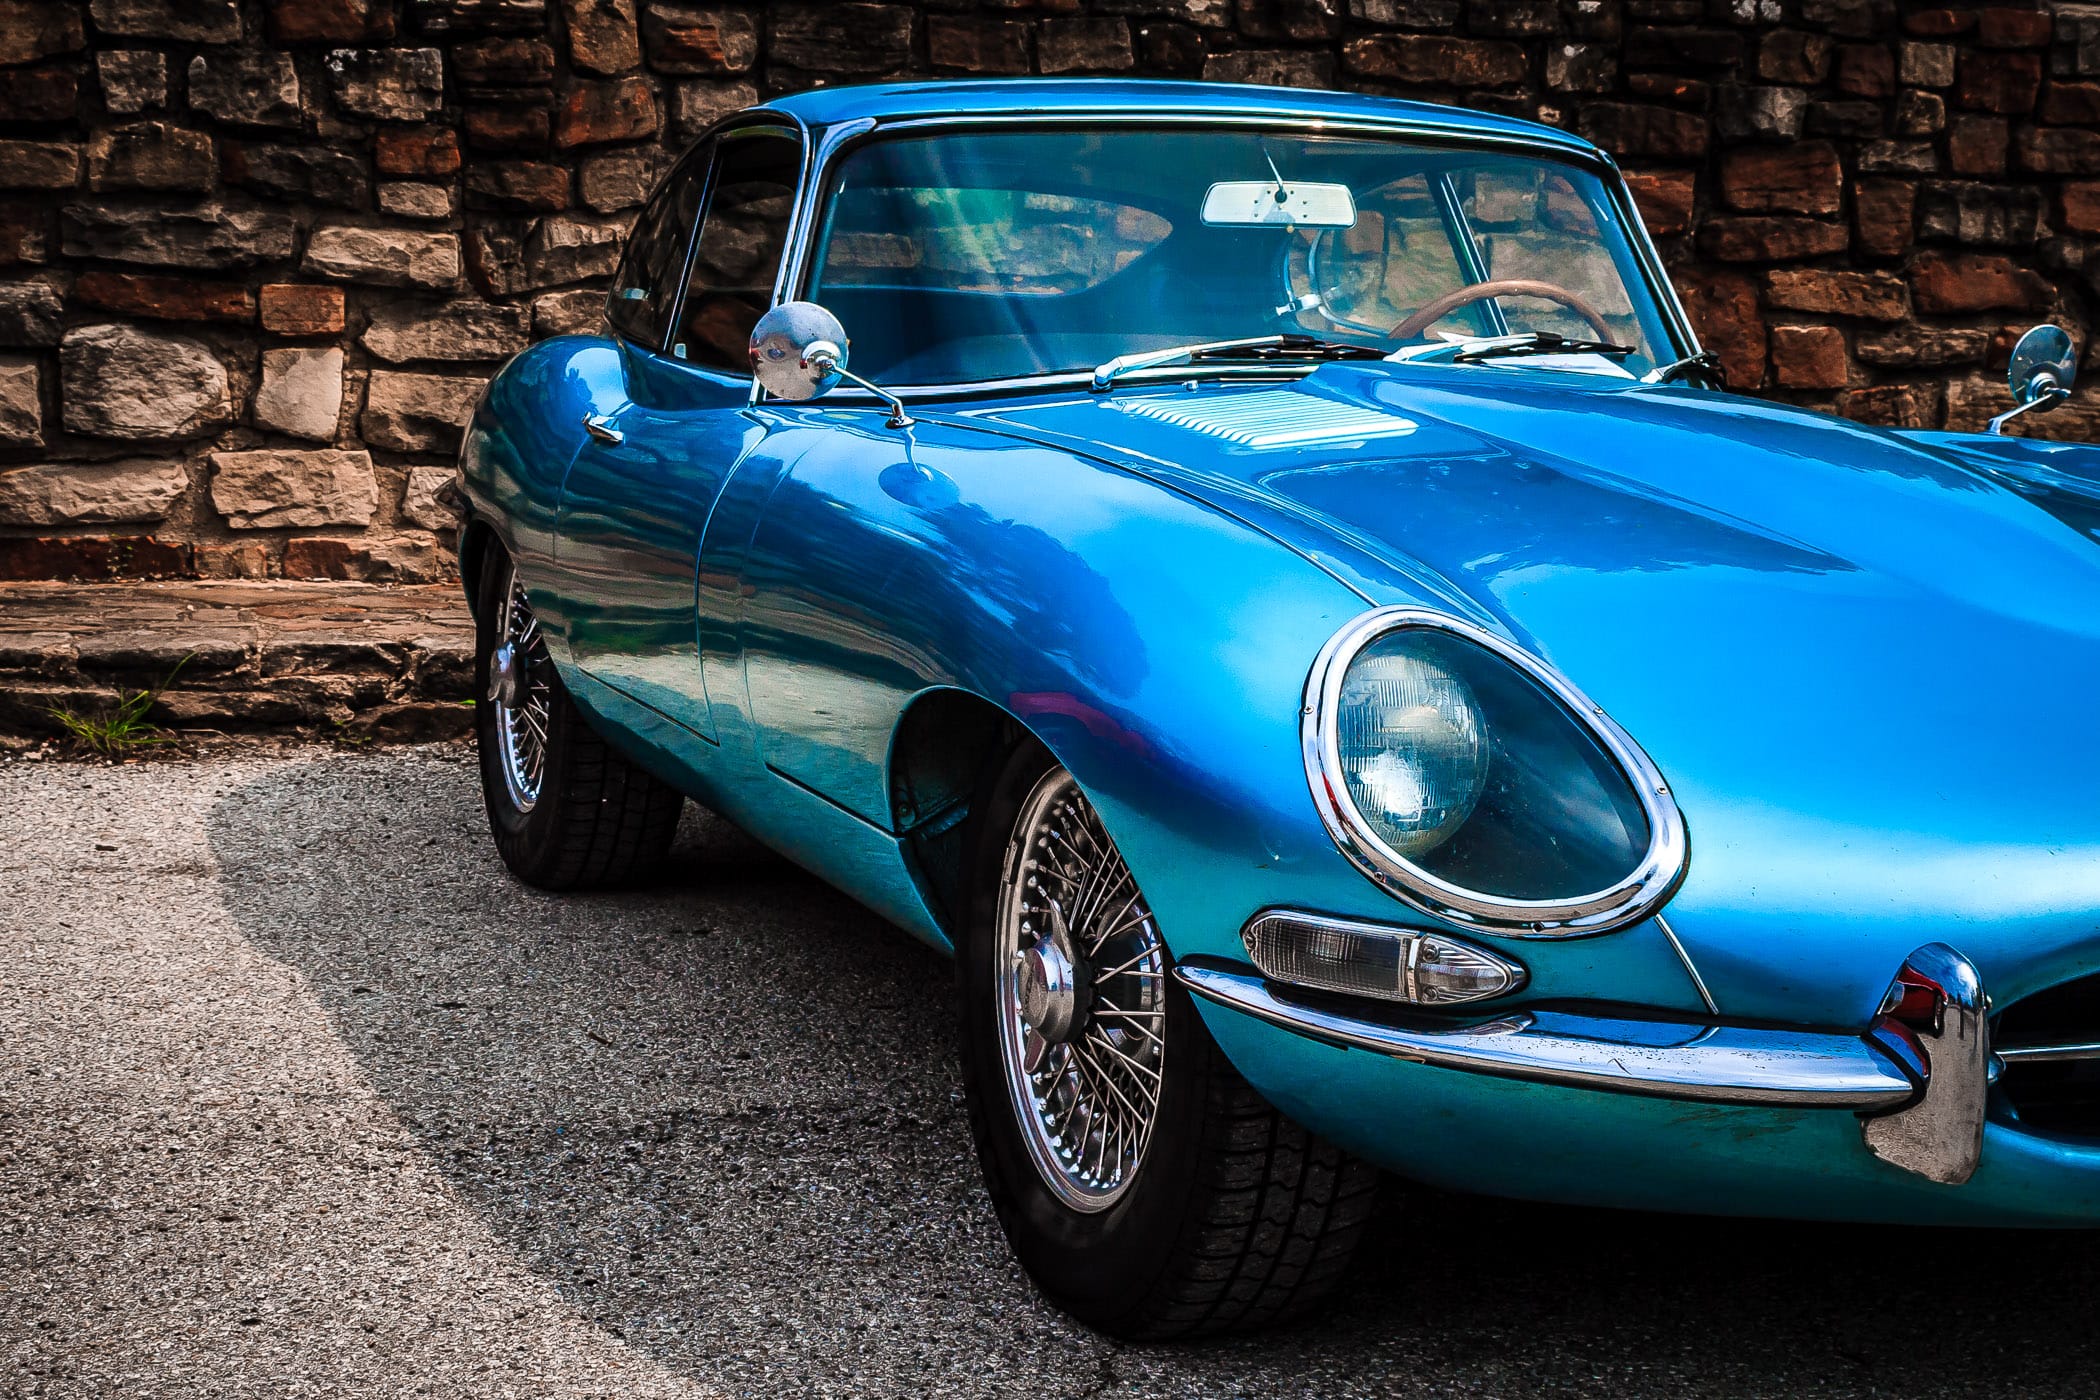 A classic Jaguar spotted at Dallas' All British and European Car Day.